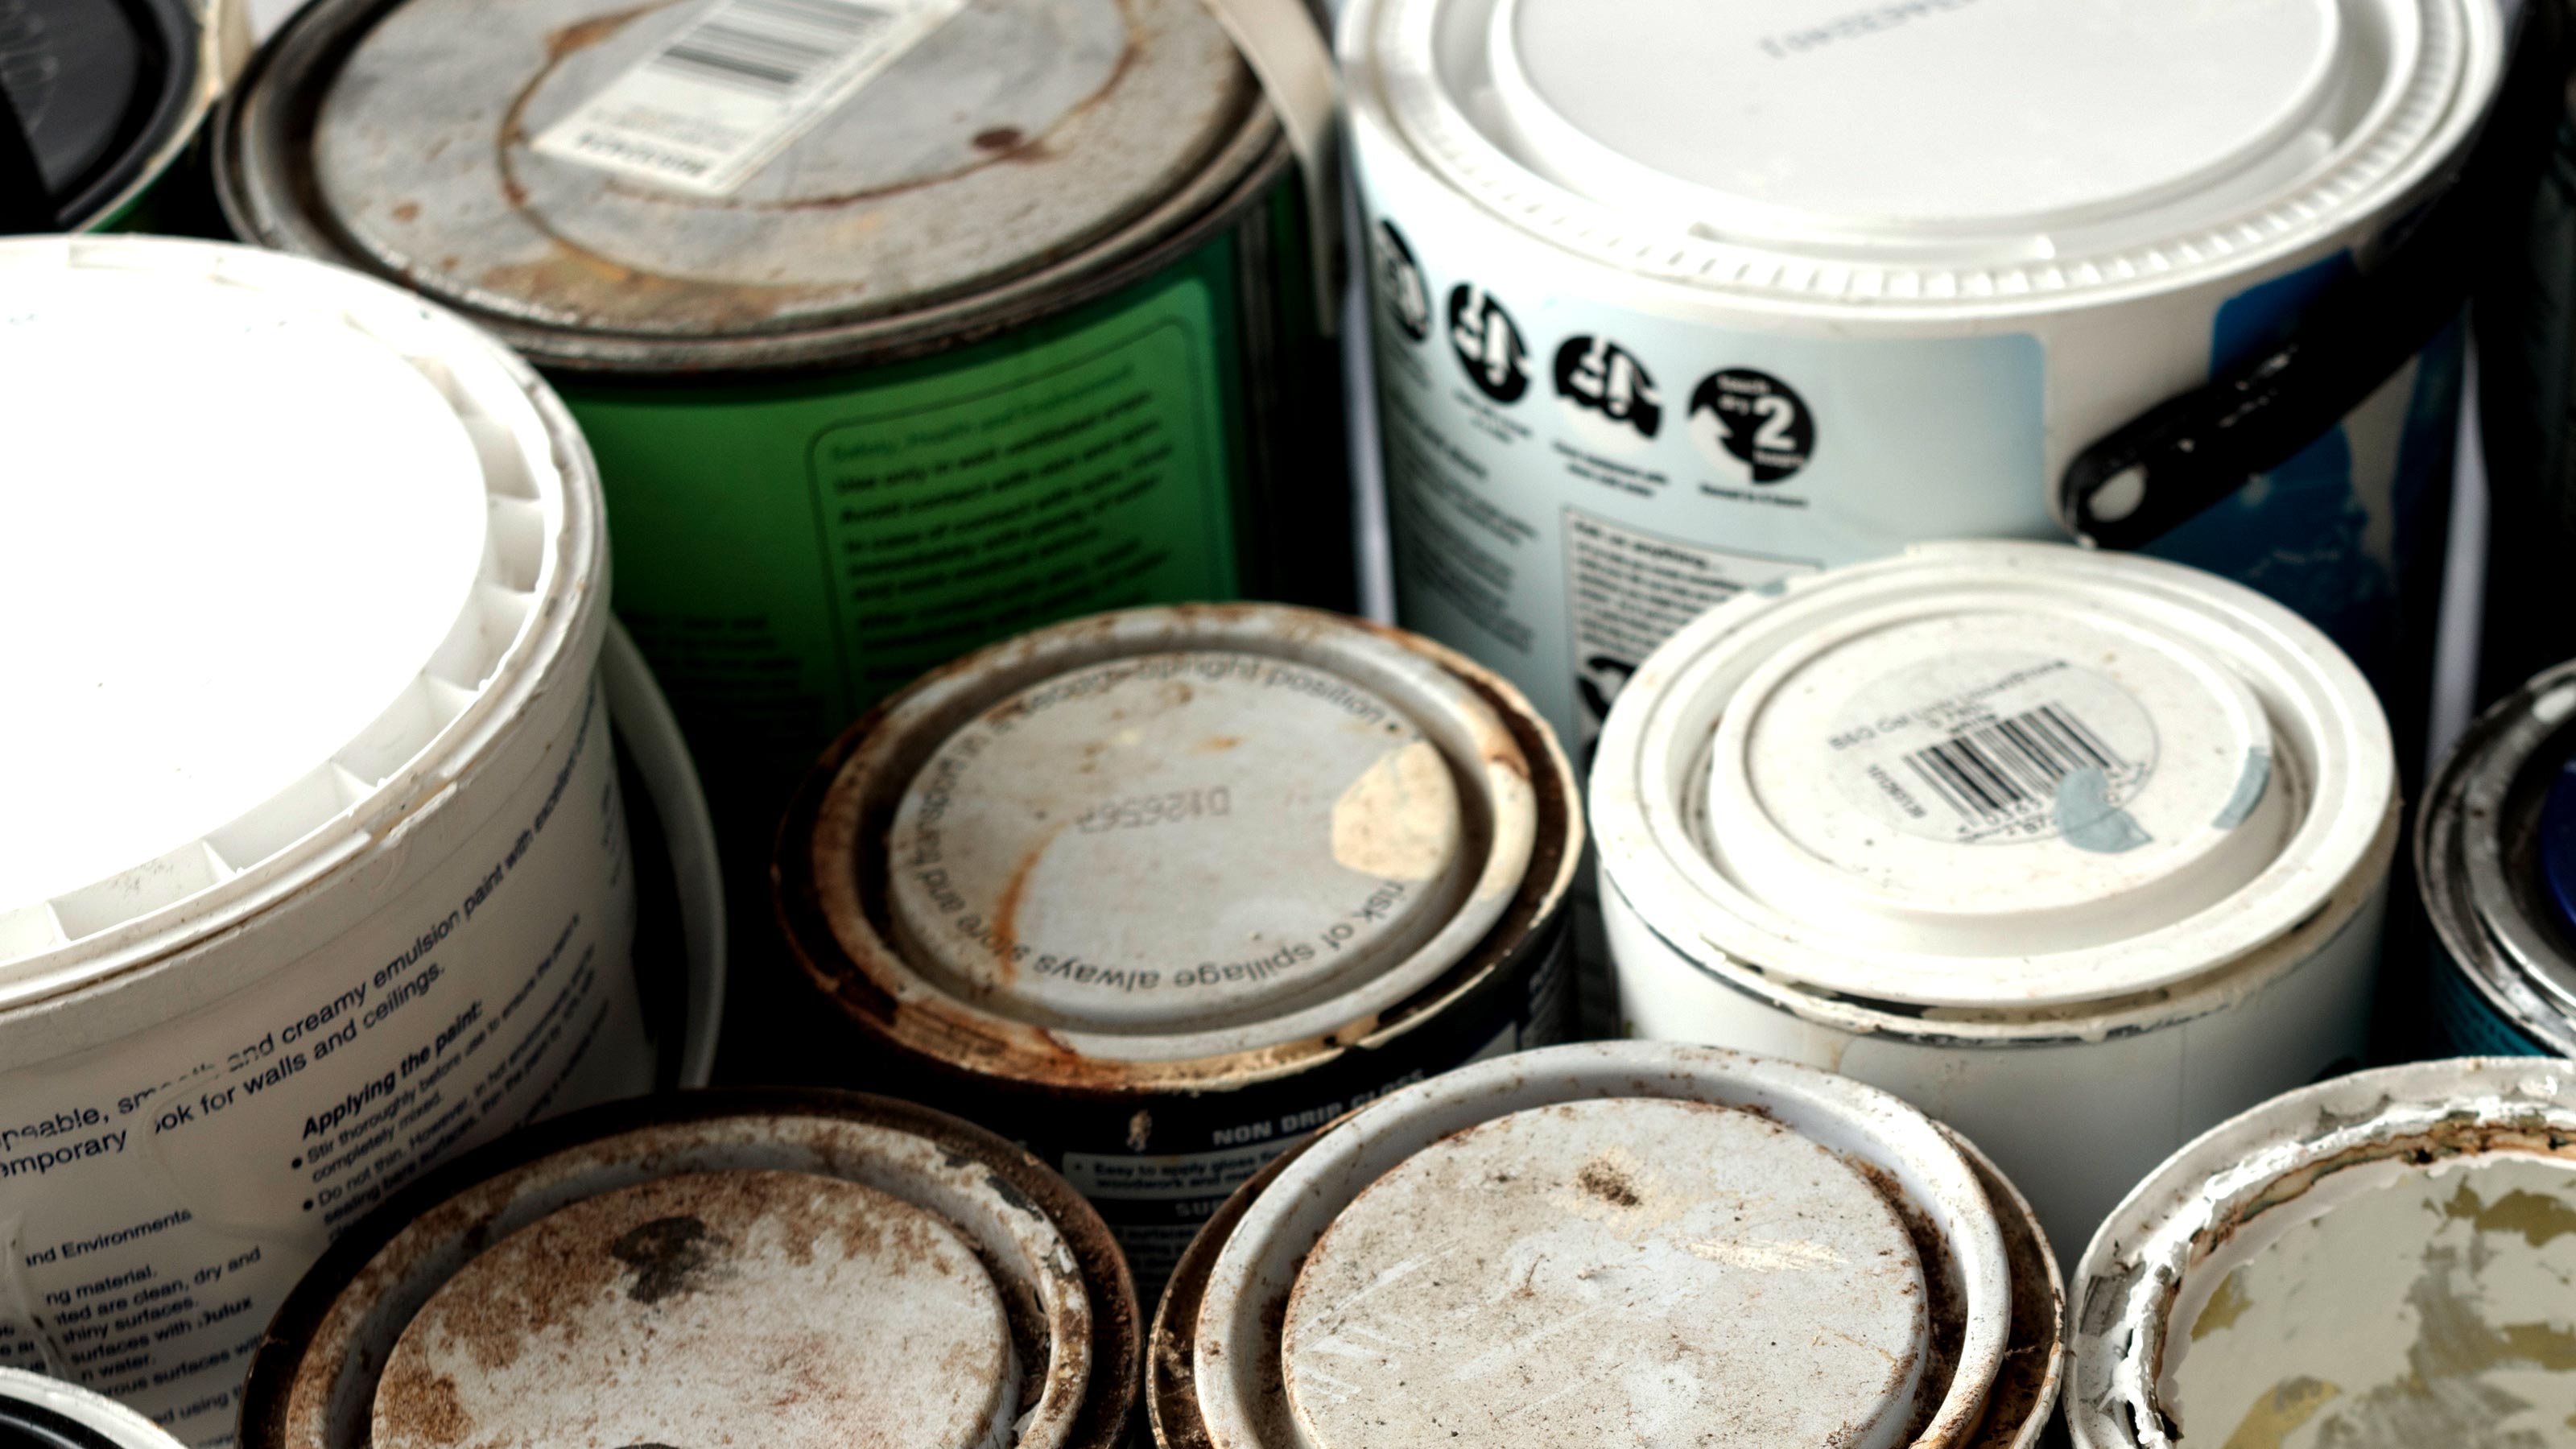 How To Store Paint: Keep Leftover Paint Fresh